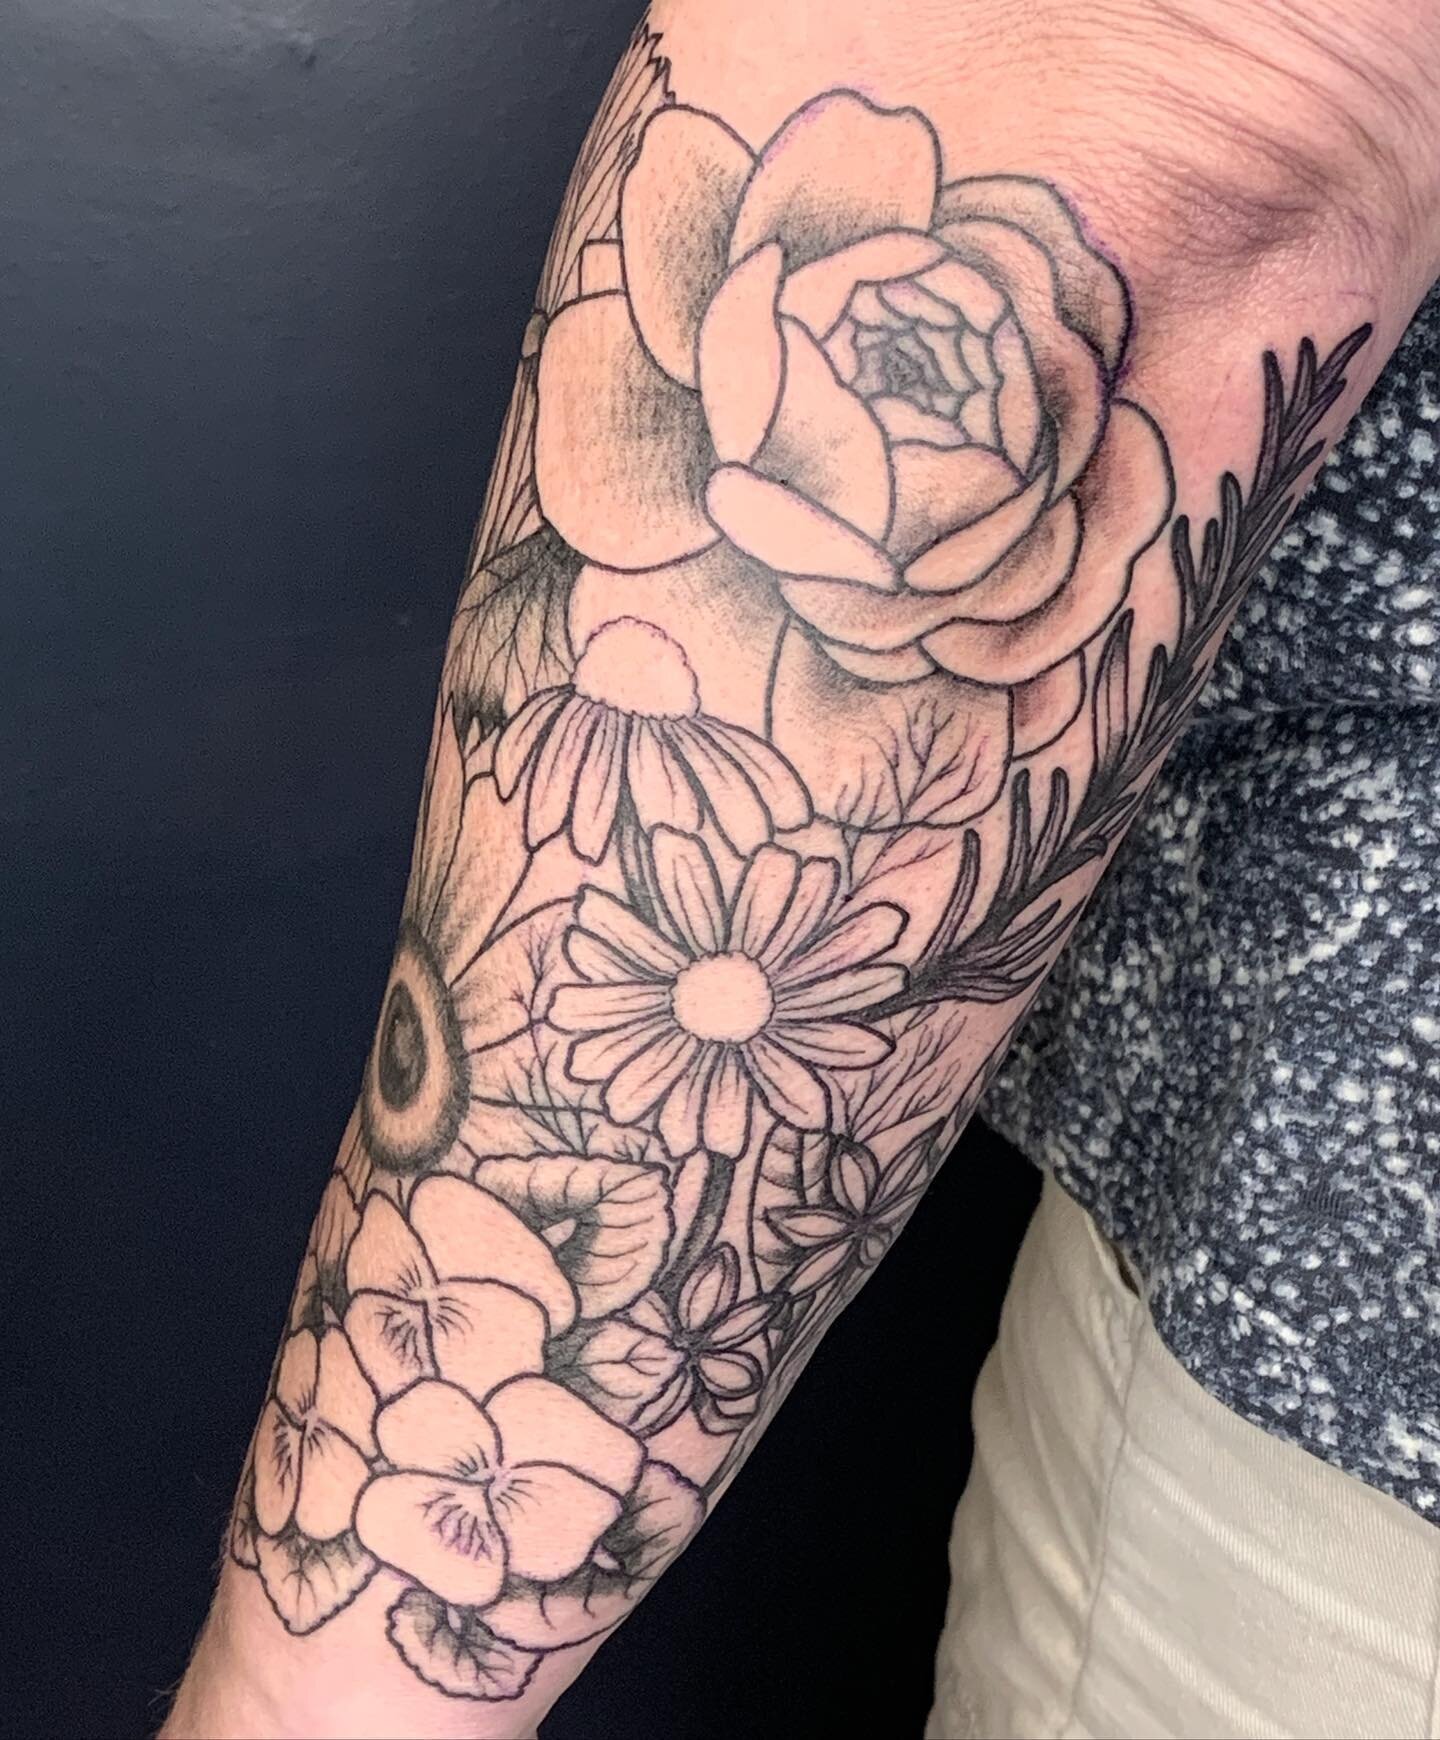 Added all this to this arm today to connect with previous work done on the inside of the forearm. Today = Violets, Anise, Chamomile, Rosemary, Chives, and Peony. Will add color next &amp; I have a hunch this will turn into a full sleeve someday &hell